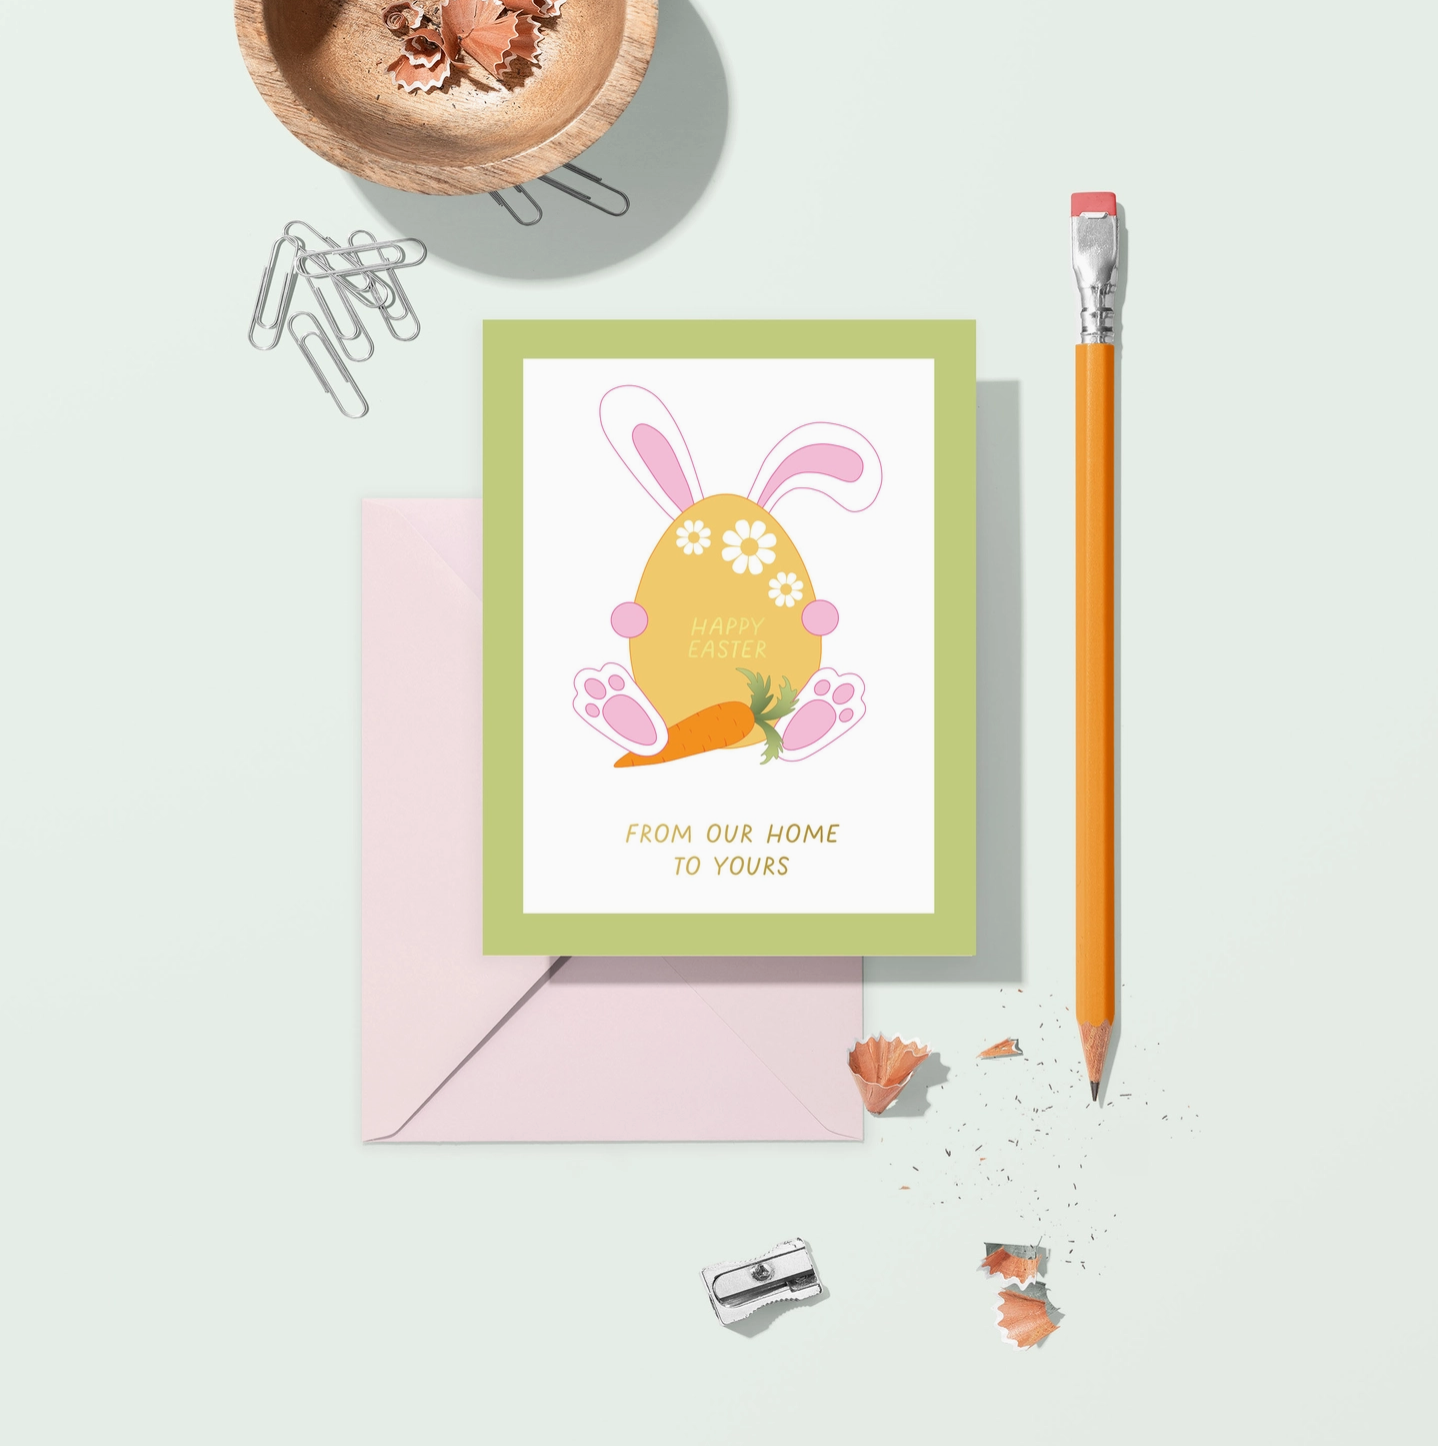 Happy Easter Card with Egg and Bunny